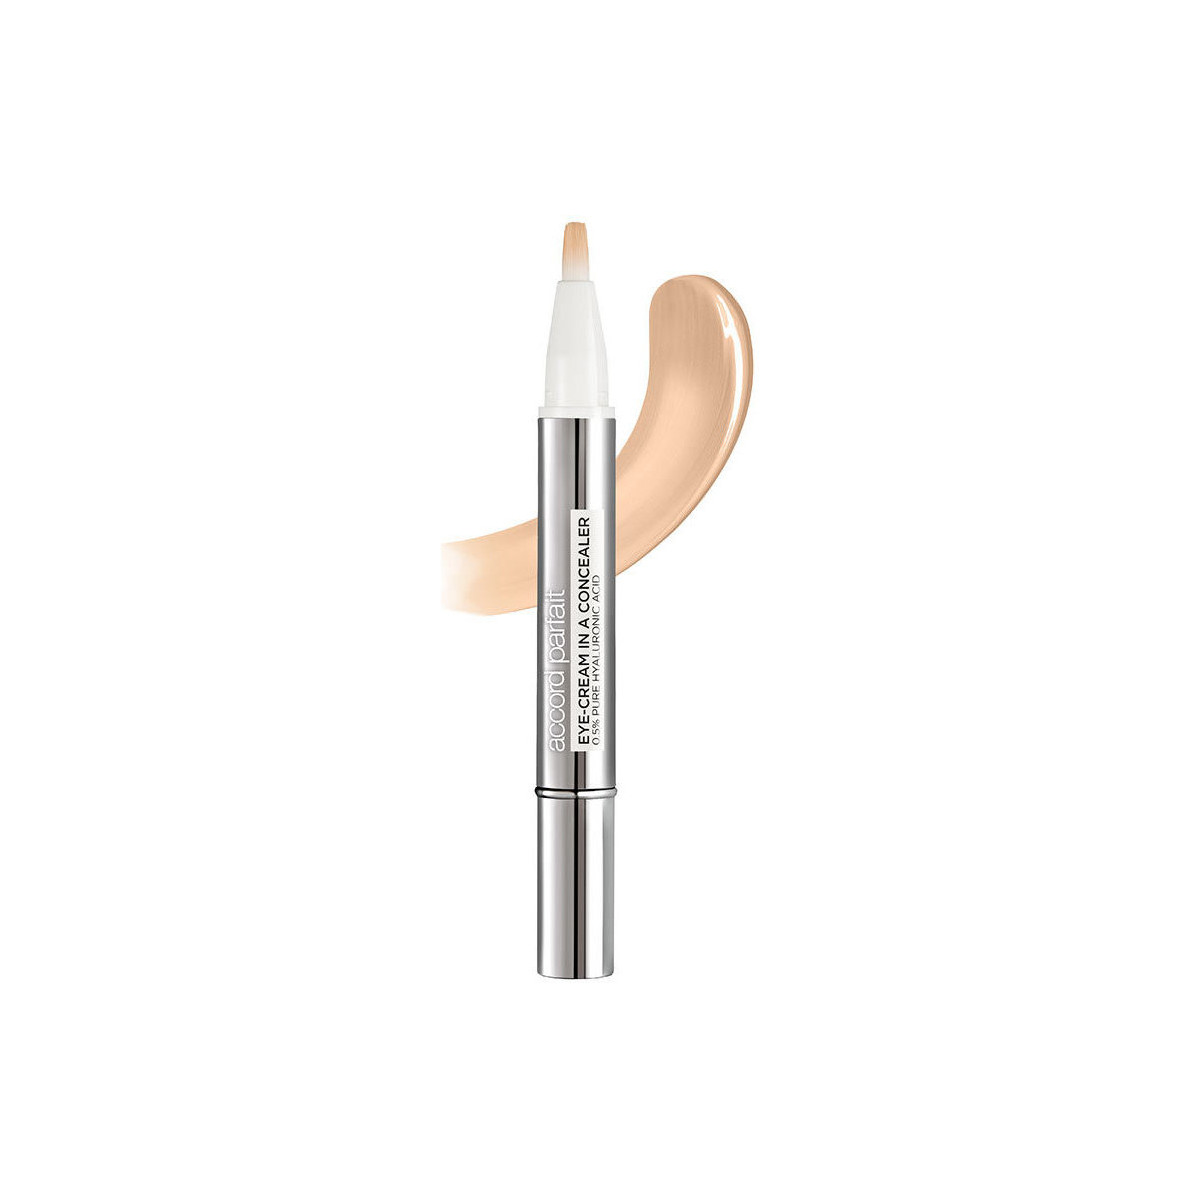 Beauty Make-up & Foundation  L'oréal Accord Parfait Eye-cream In A Concealer 3-5n-natural Beige 